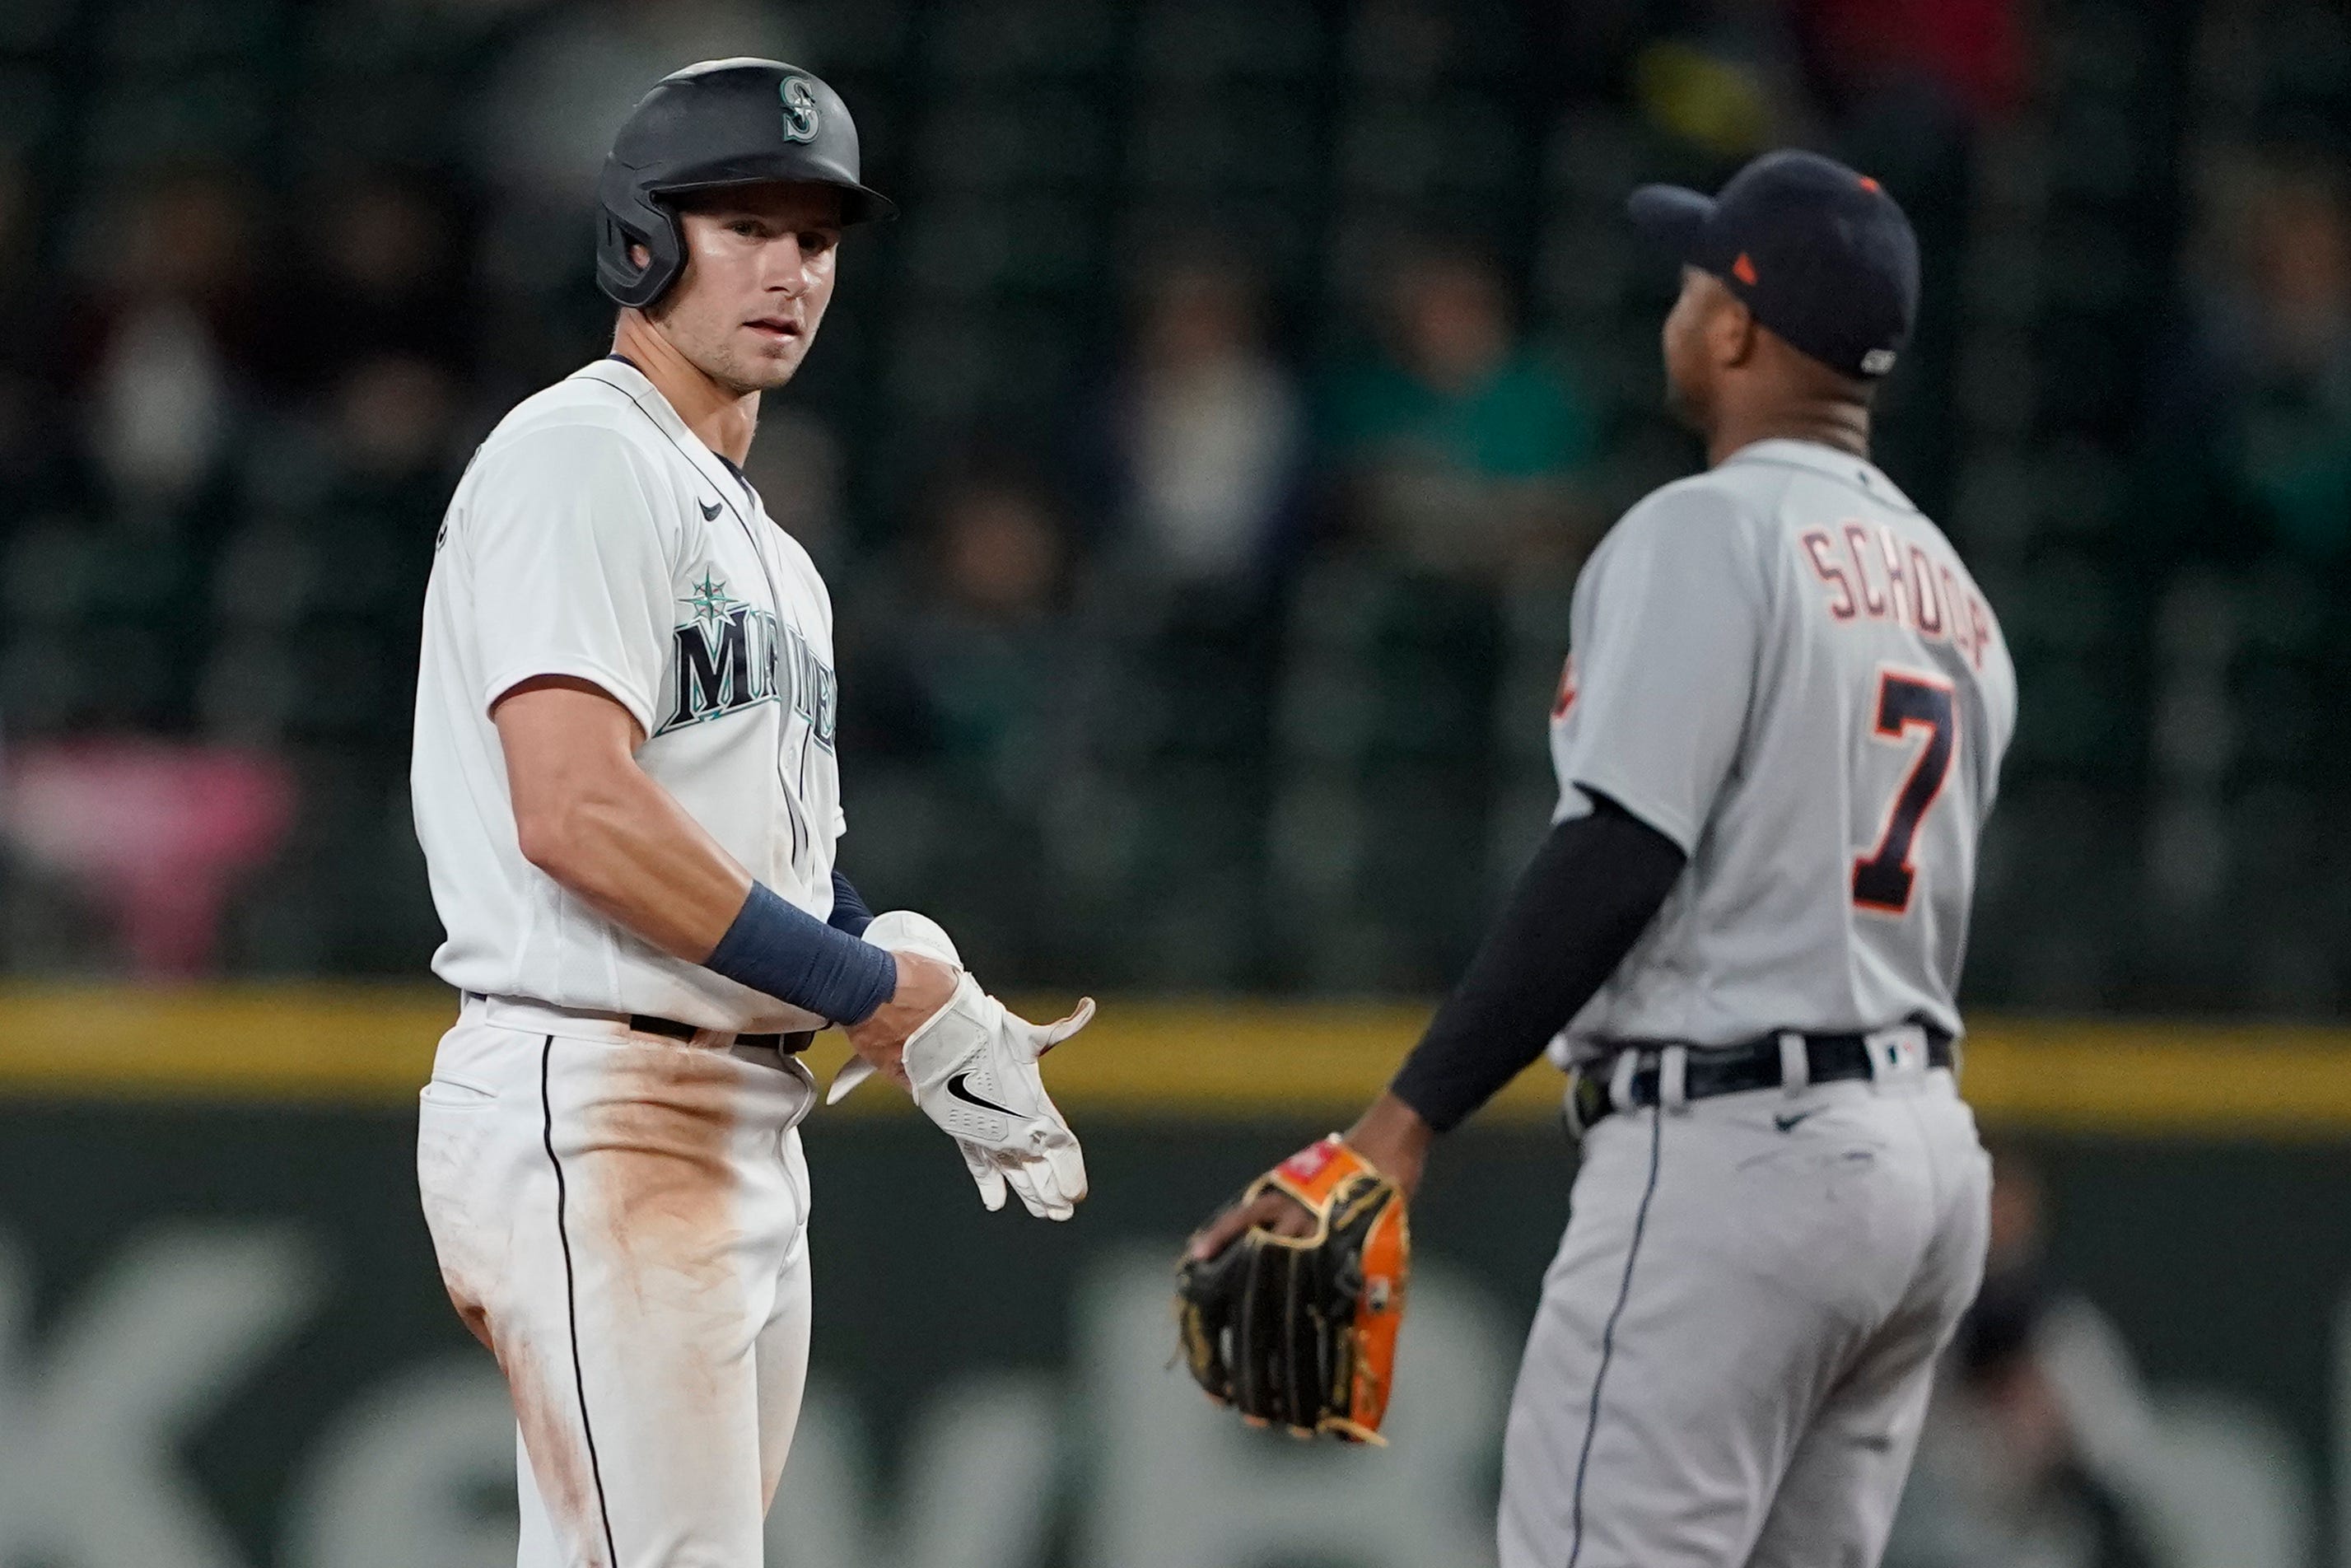 Seattle Mariners' Jarred Kelenic, left, stands on second base after a steal, as Detroit Tigers second baseman Jonathan Schoop, right, walks back to his position during the fourth inning.